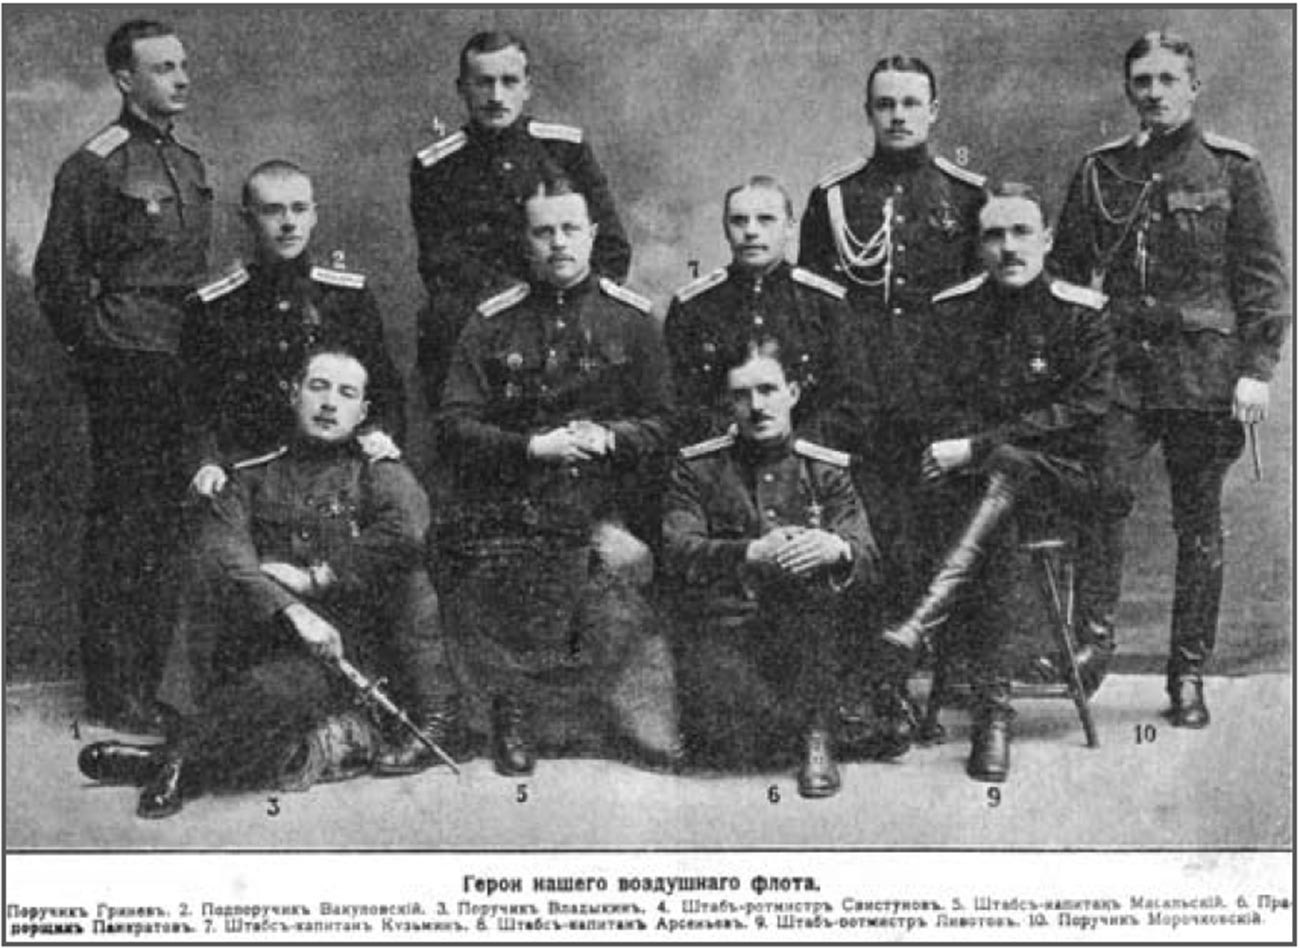 A photo of Russian hero pilots. Onisim Pankratov can be seen in the front row (center), seated on the floor